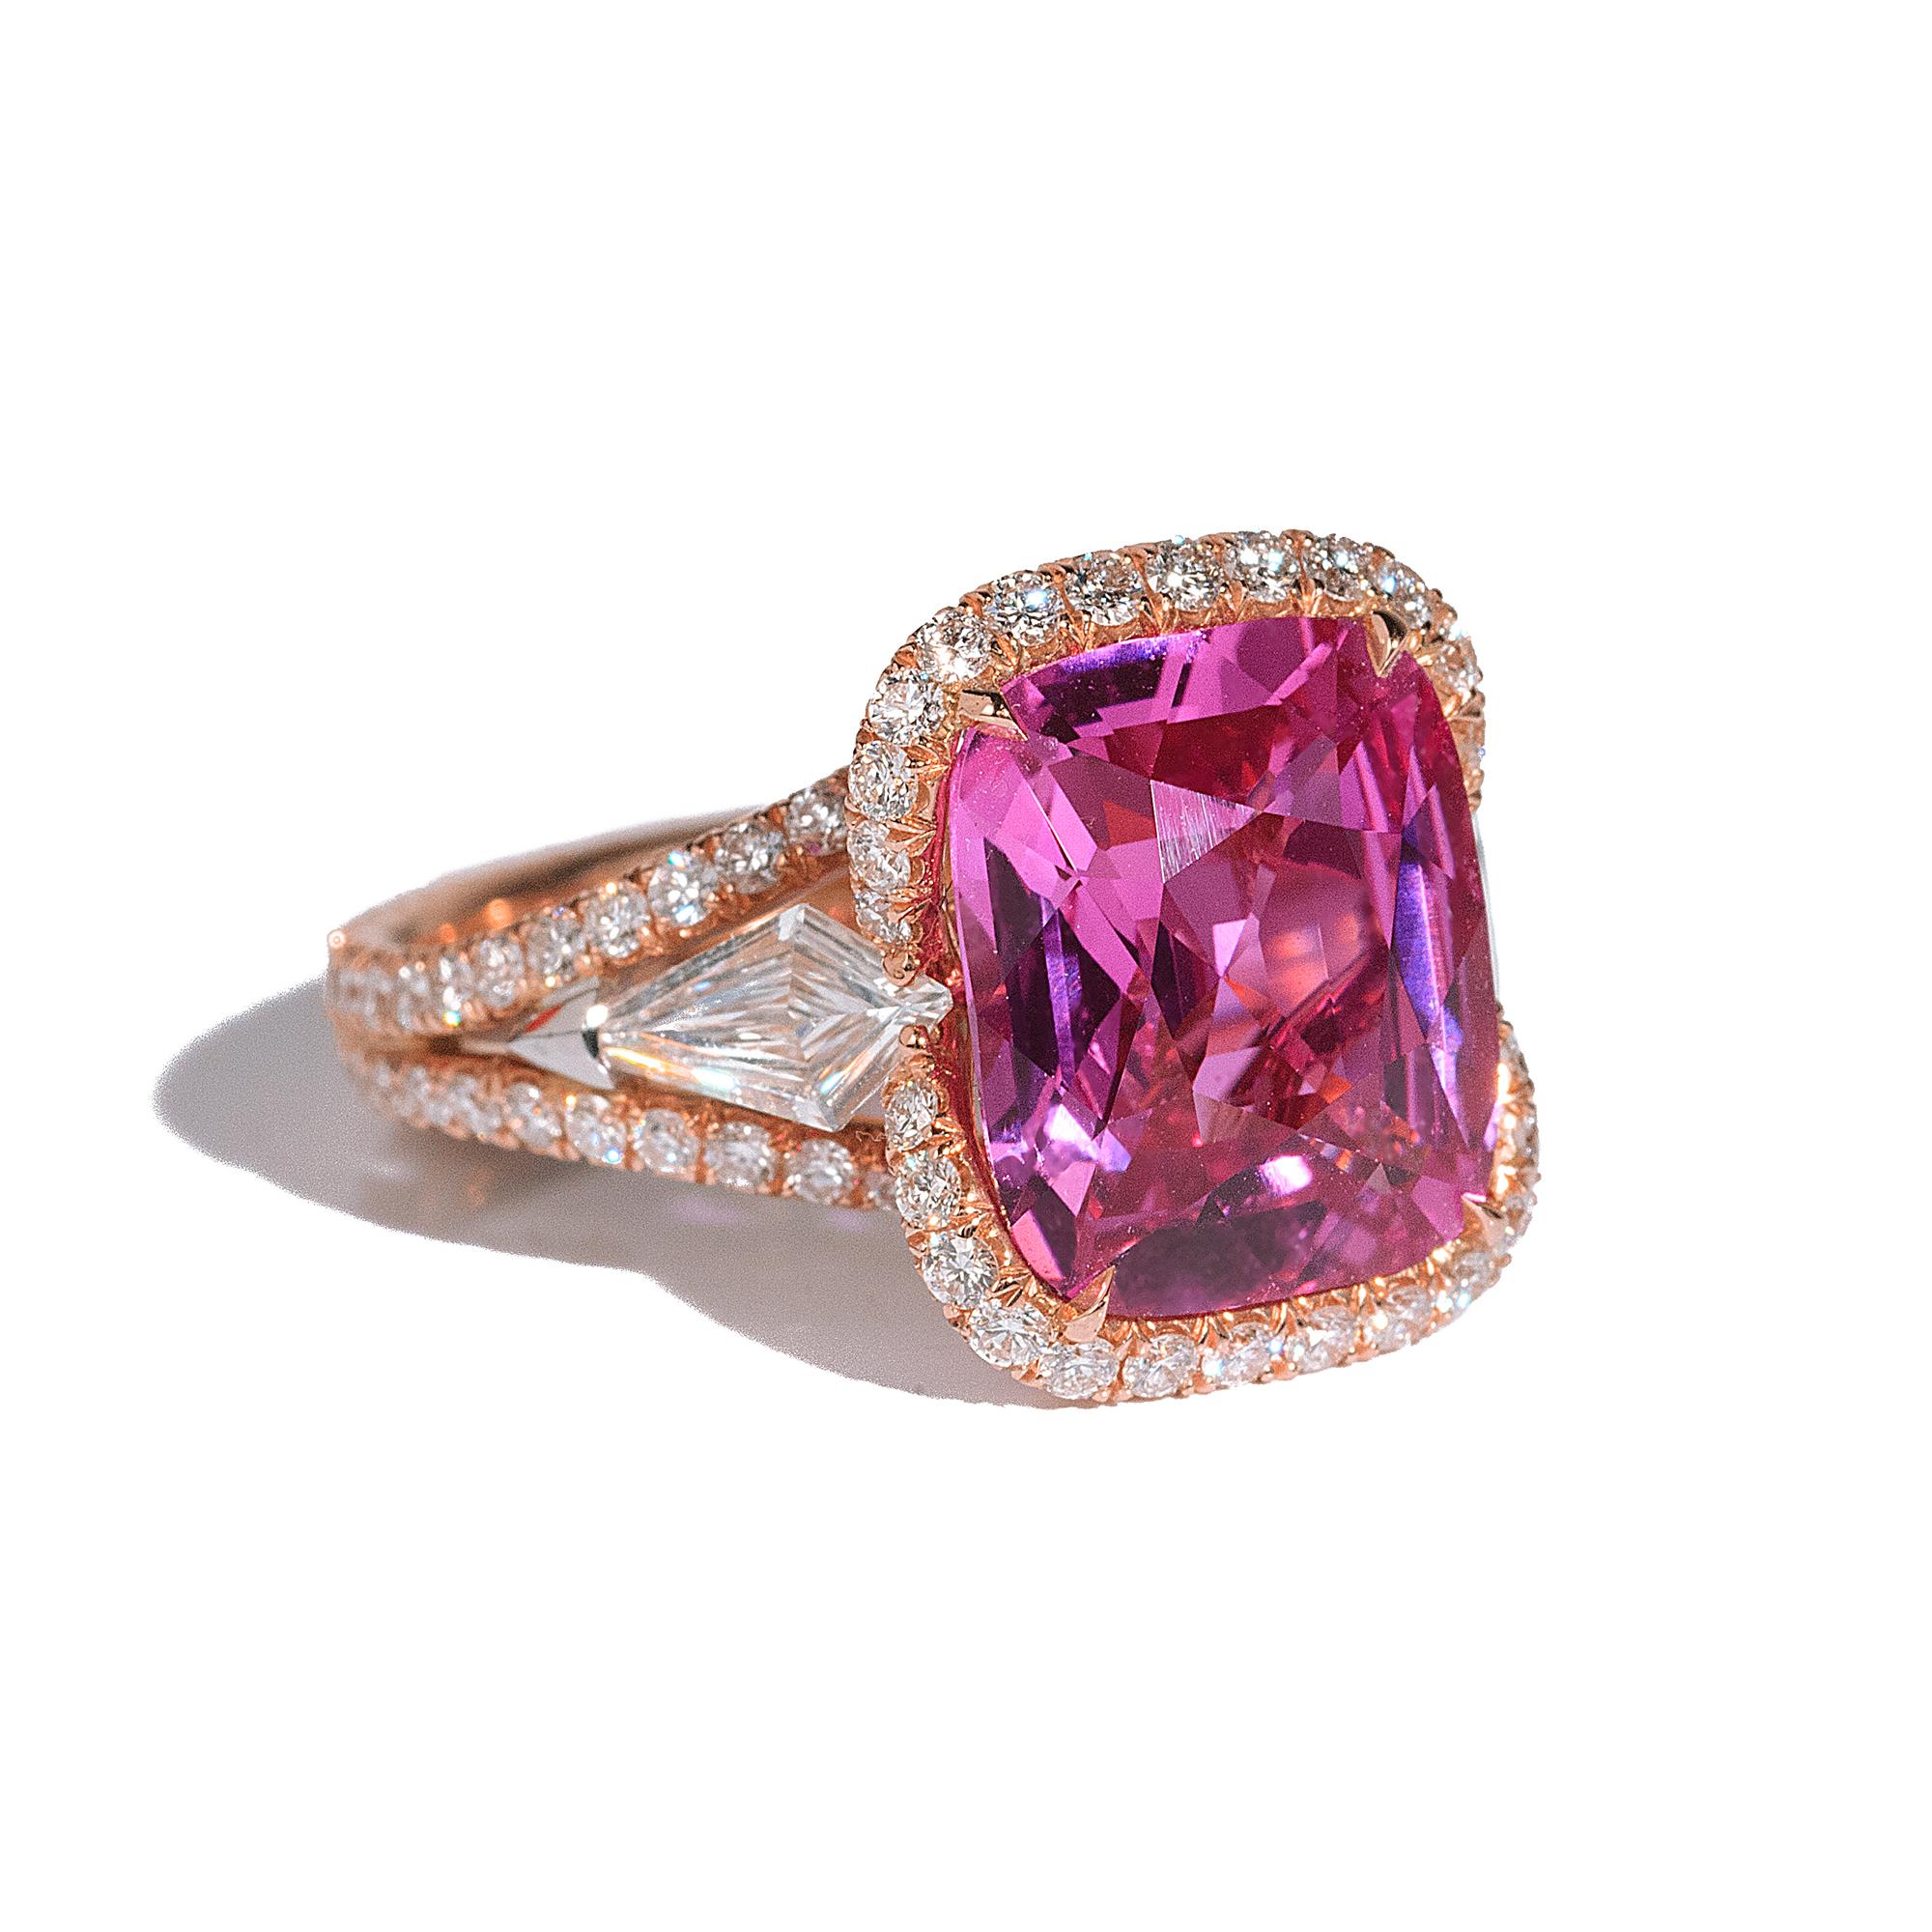 An 18kt rose gold ring centered upon a magnificent 5.58 carat cushion pink sapphire, certified by GIA and C. Dunaigre, flanked by kite diamonds and set with an intricate diamond micropavé design. Total diamond weight 2.03 carats.

Modern jewels for